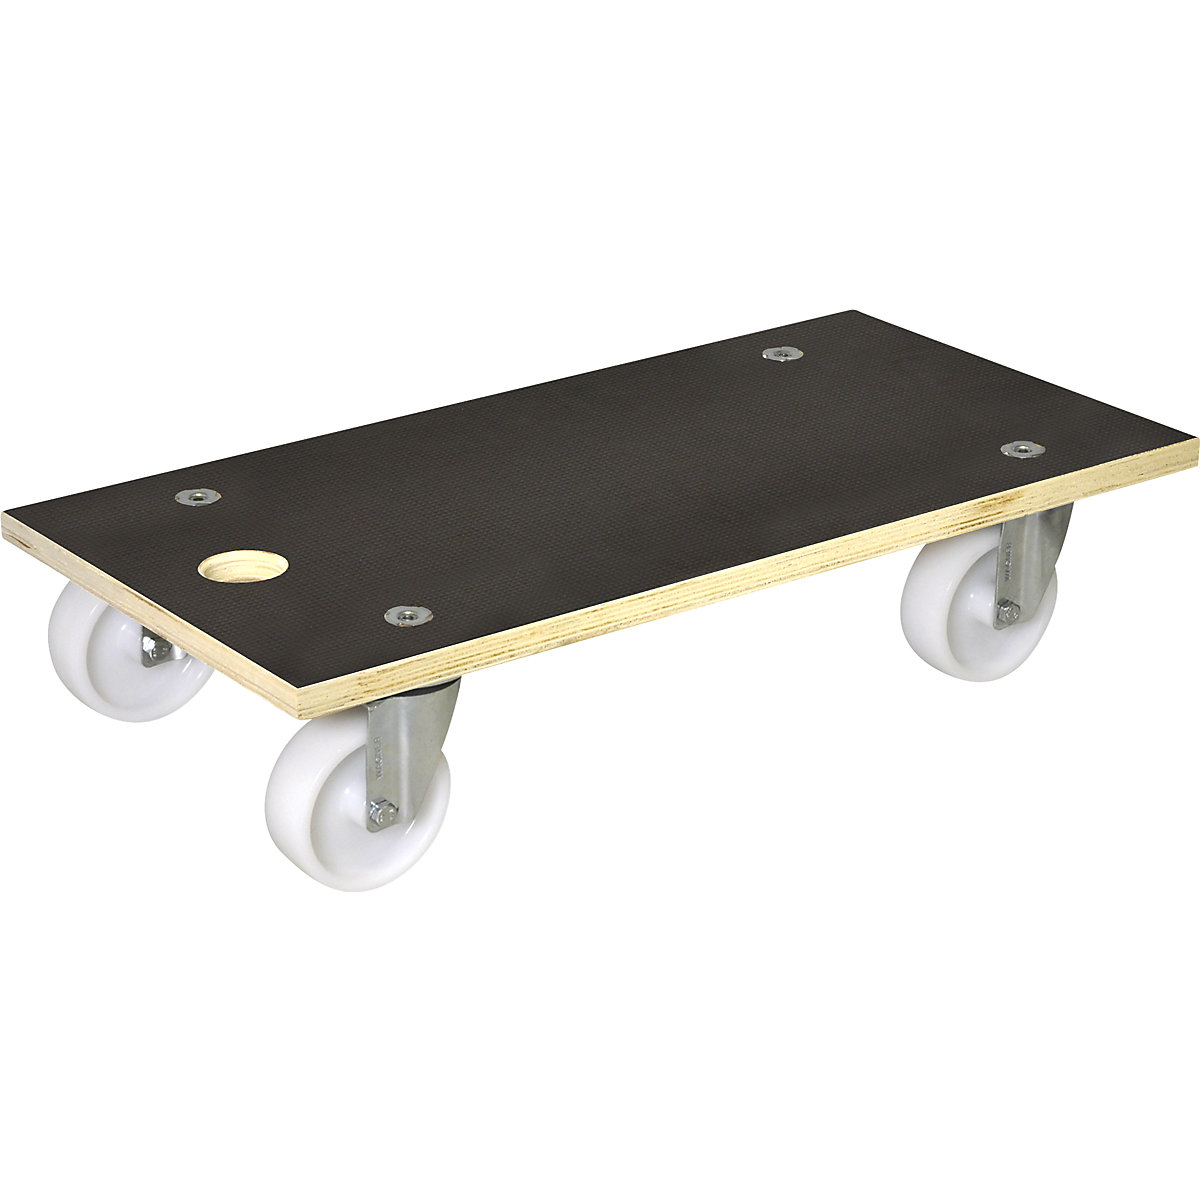 Transport dolly – Wagner, max. load 250 kg, pack of 2, LxW 575 x 300 mm, 5+ packs-7